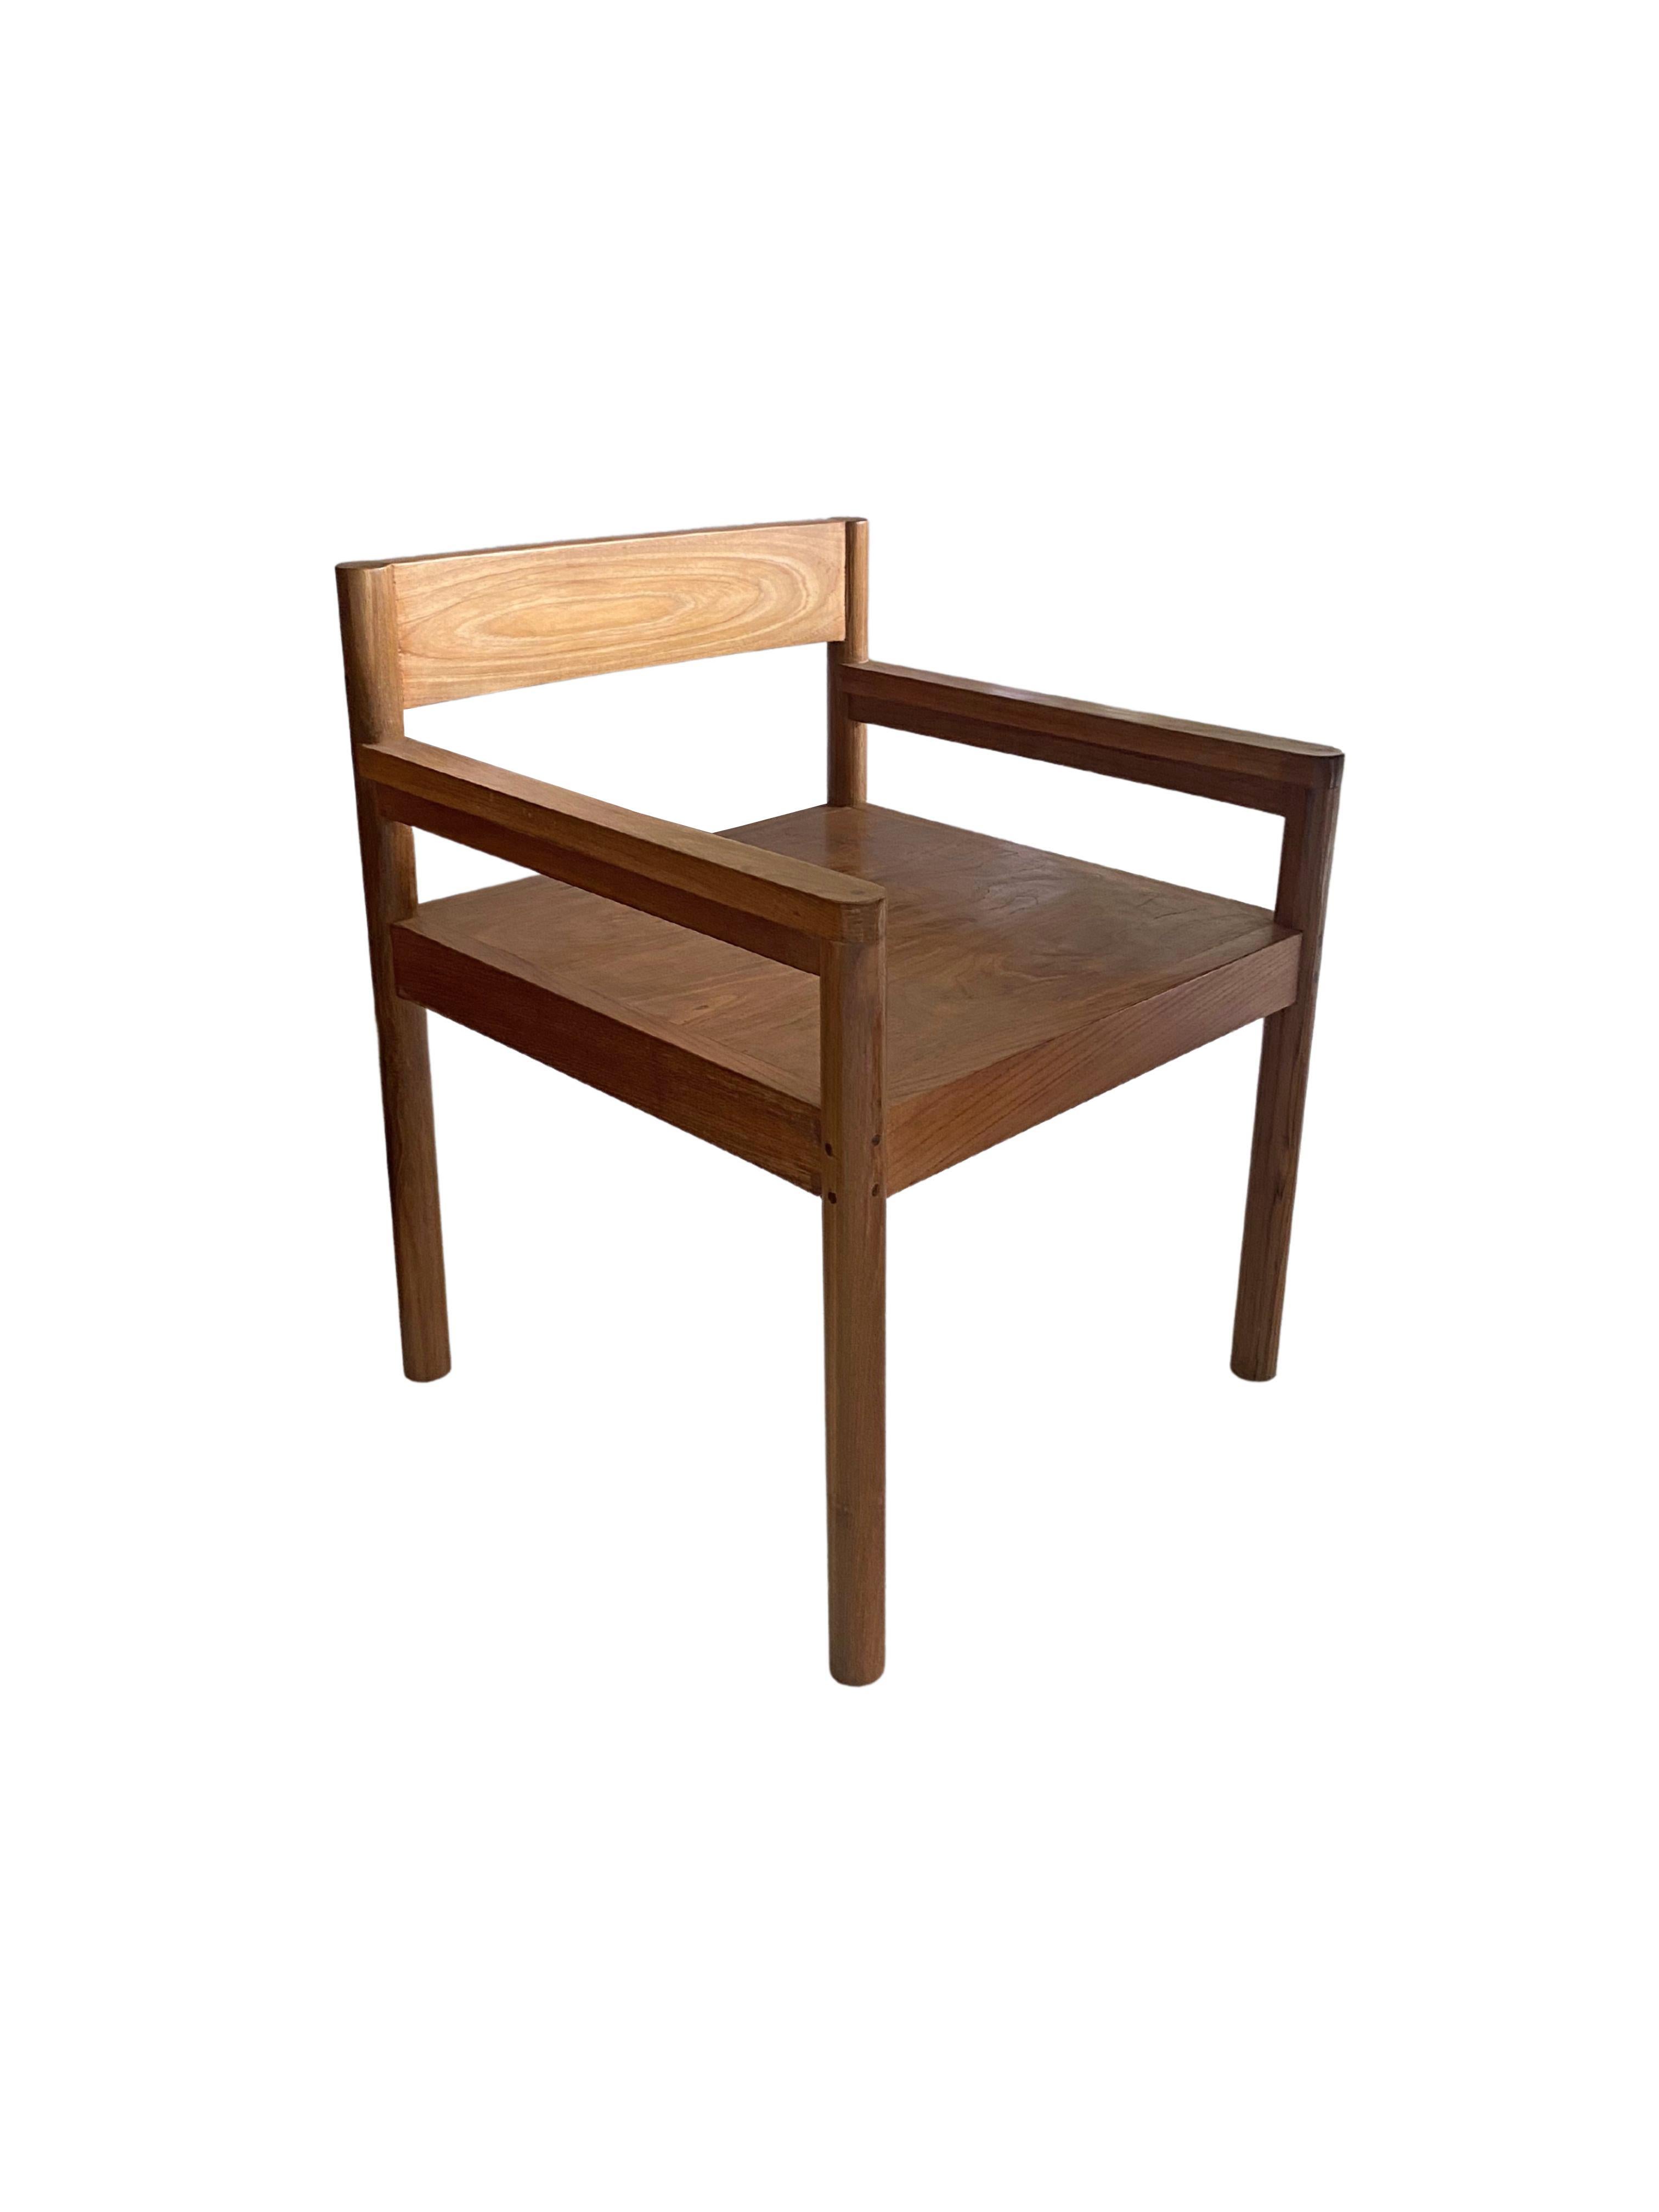 Hand-Crafted Modern Teak Wood Chair With stunning Wood Pattern Detailing